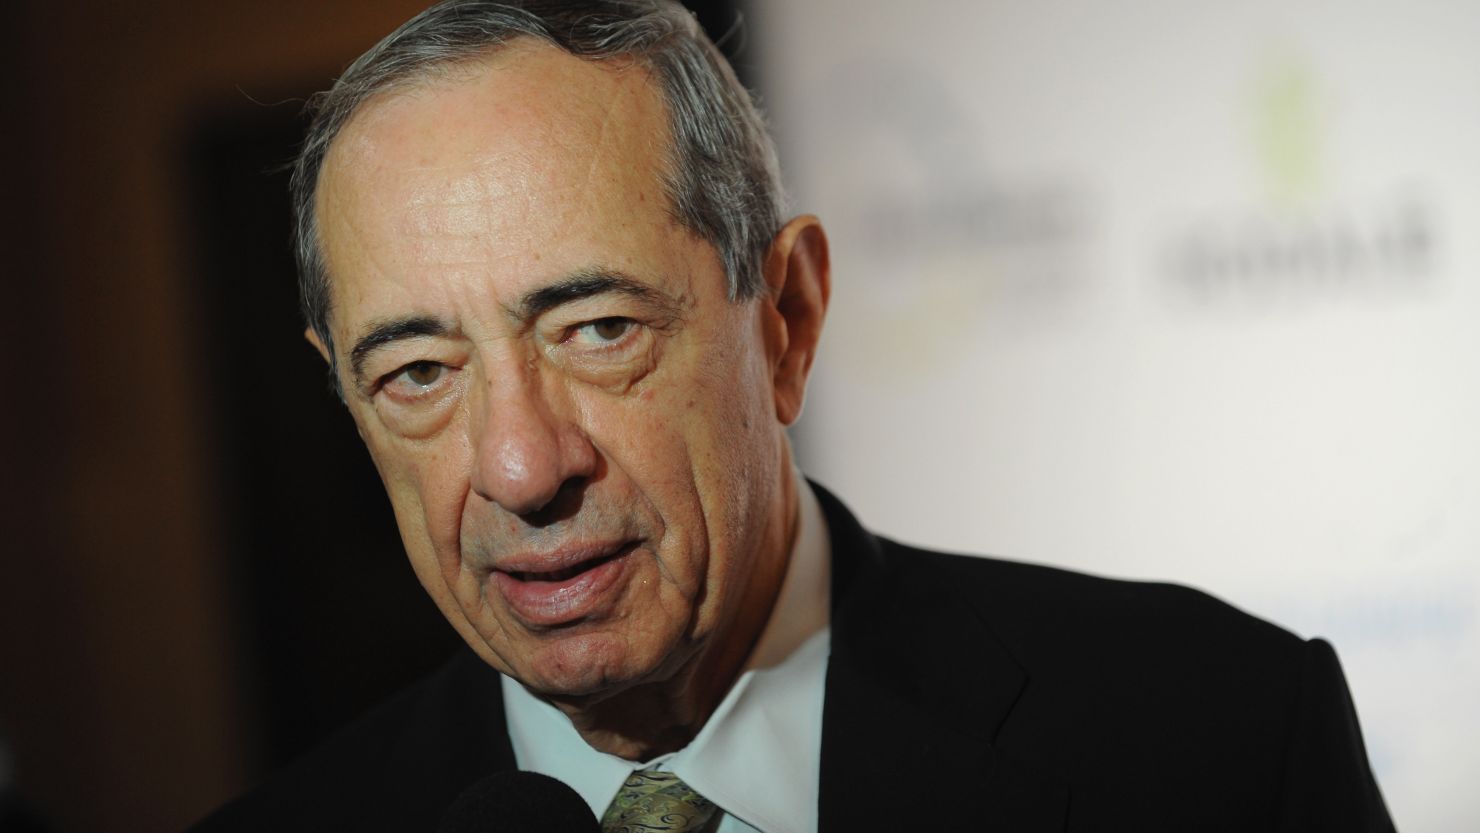 Former New York Gov. Mario Cuomo, pictured here in 2009, has been hospitalized.